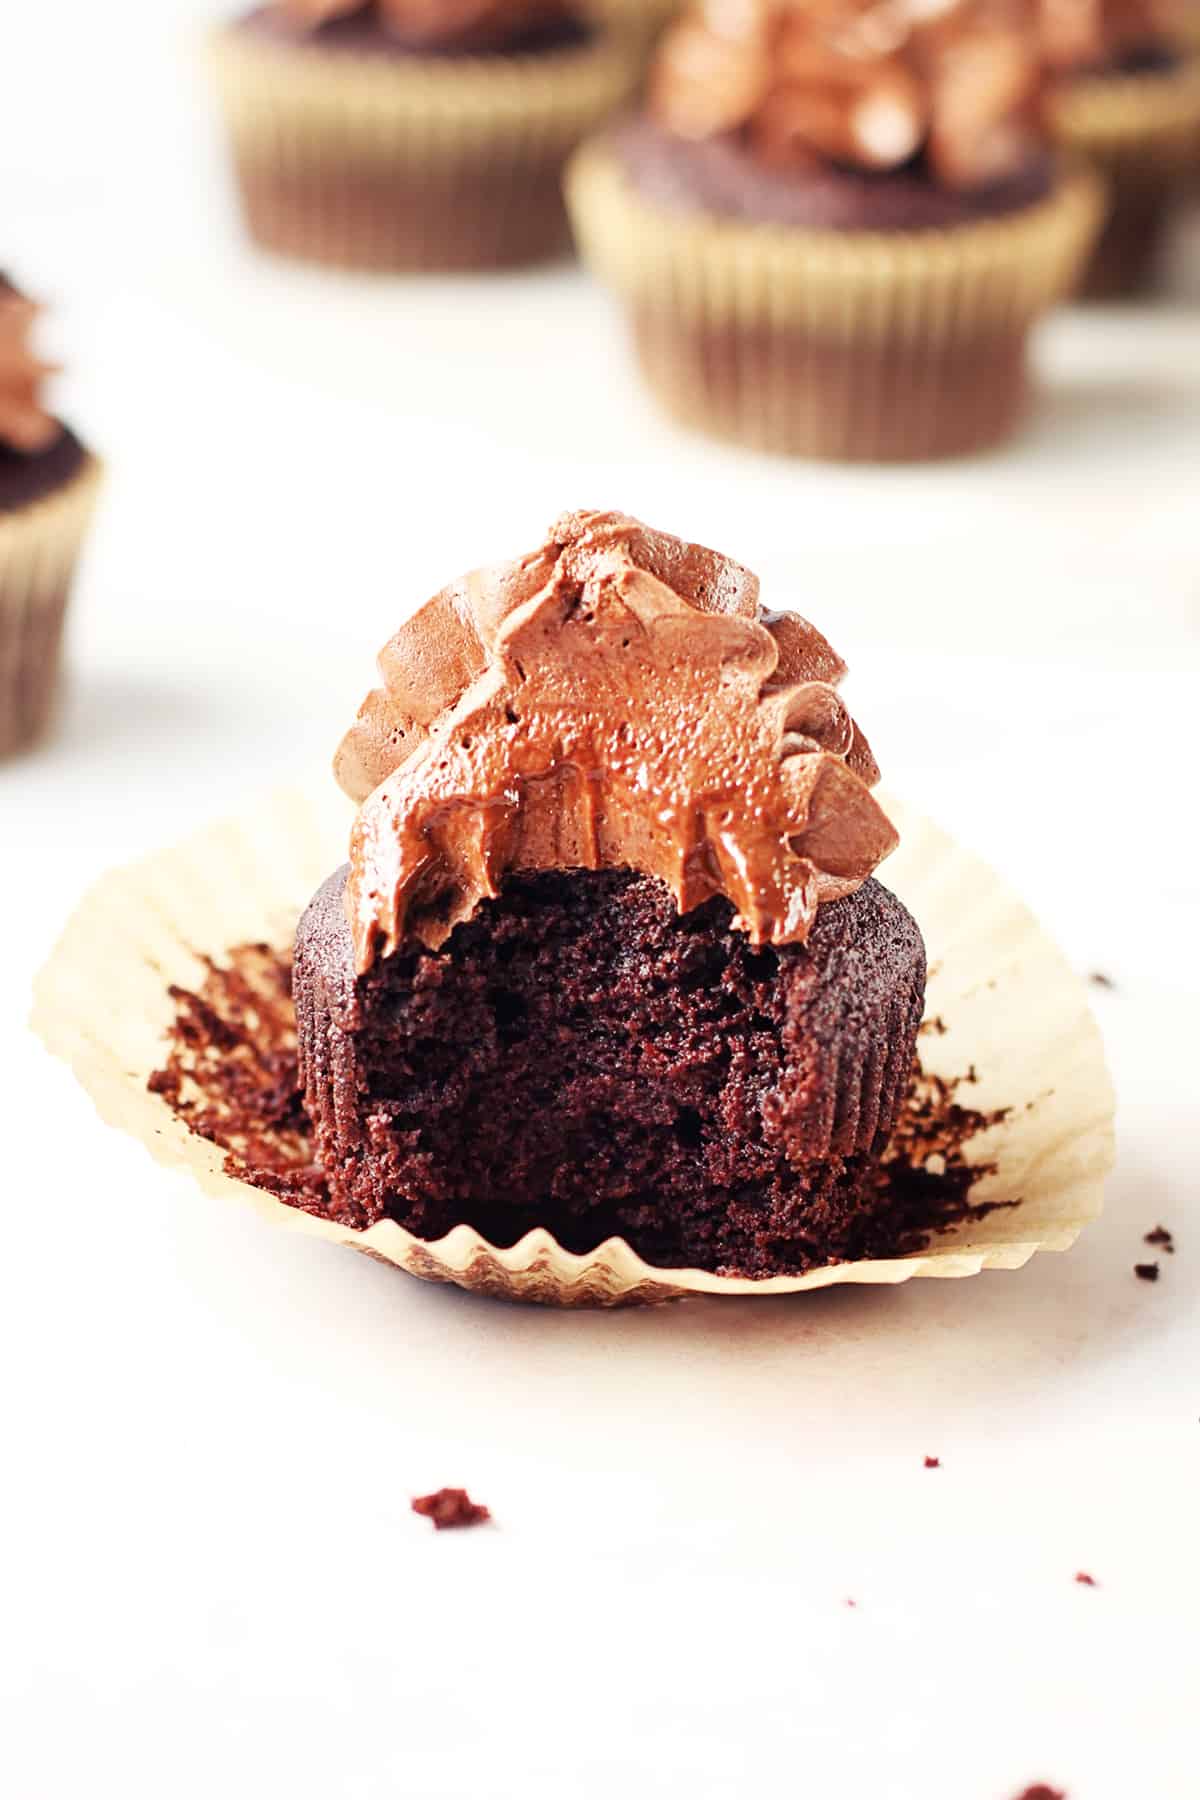 Paleo chocolate cupcake with a big bite taken out of it.